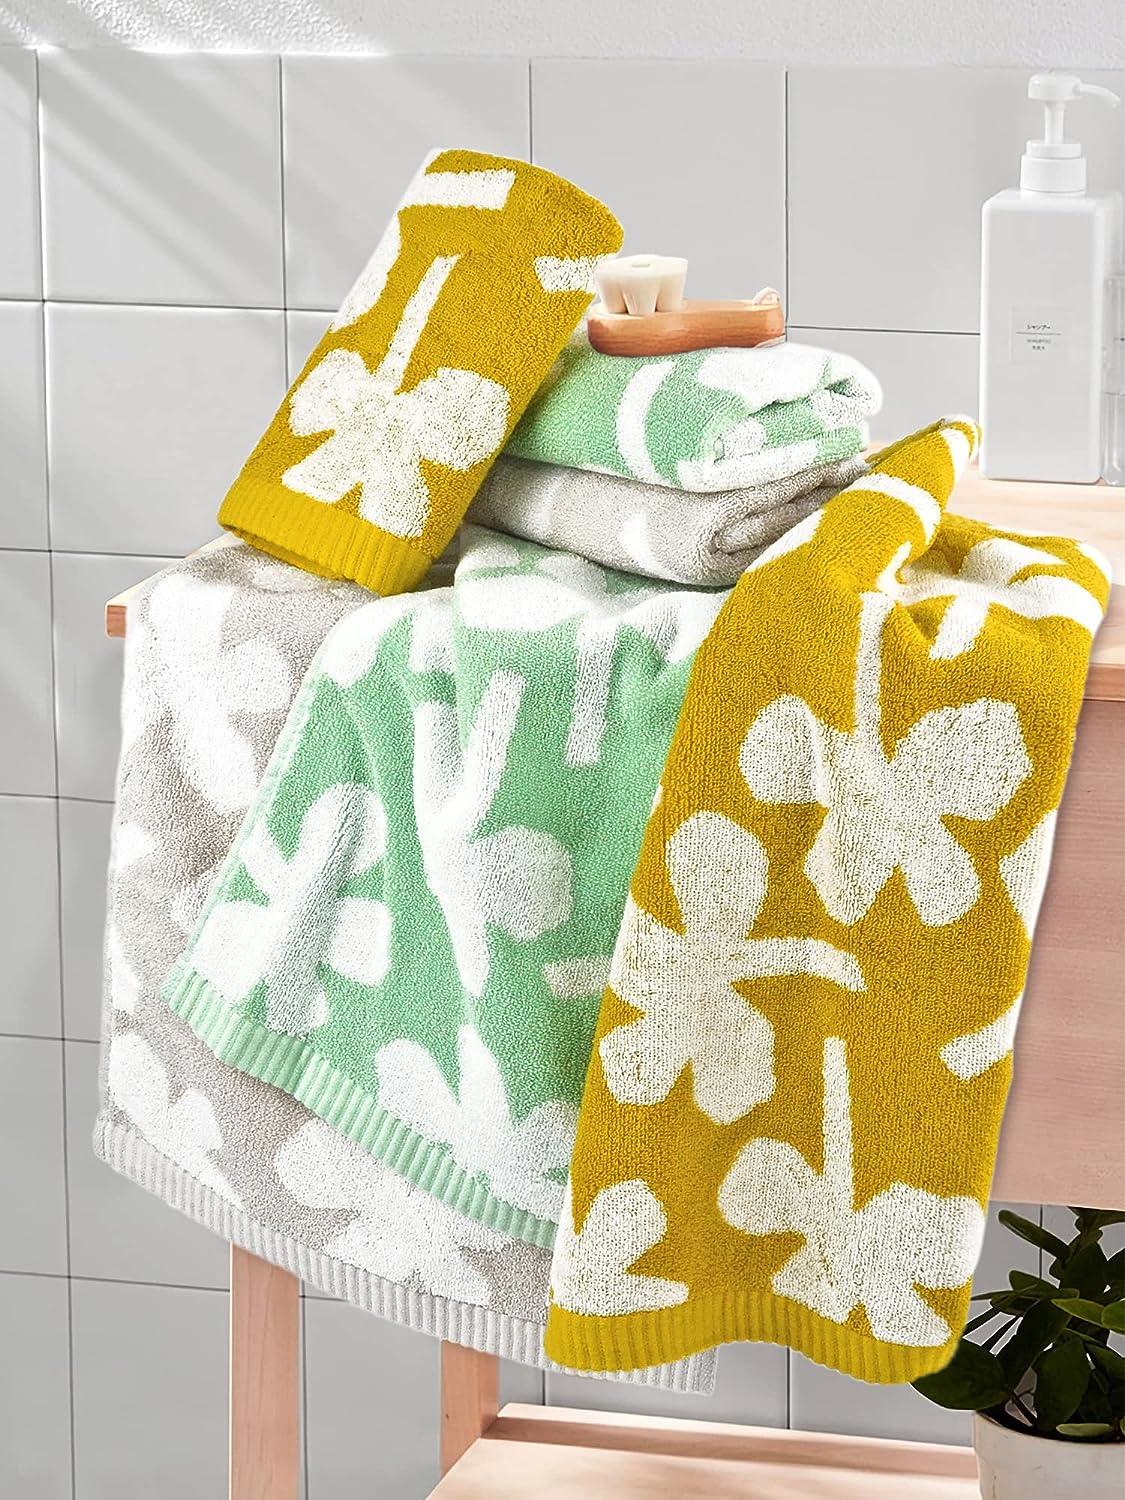 Jacquotha Green Hand Towels for Bathroom Set of 4 - Cute Checkered